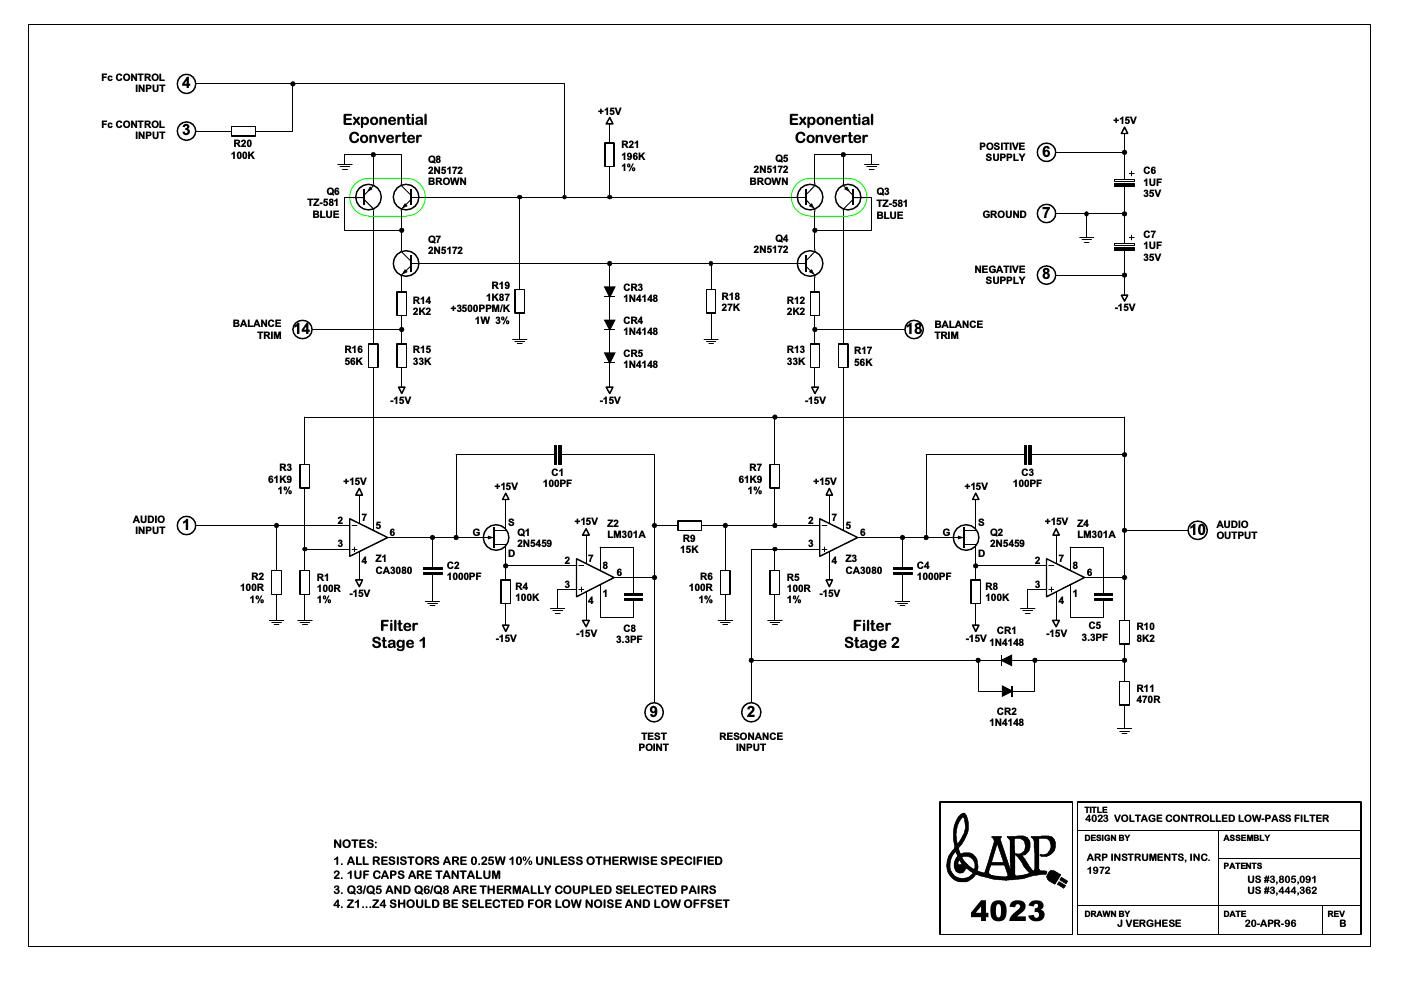 arp 4023 voltage controlled low pass filter